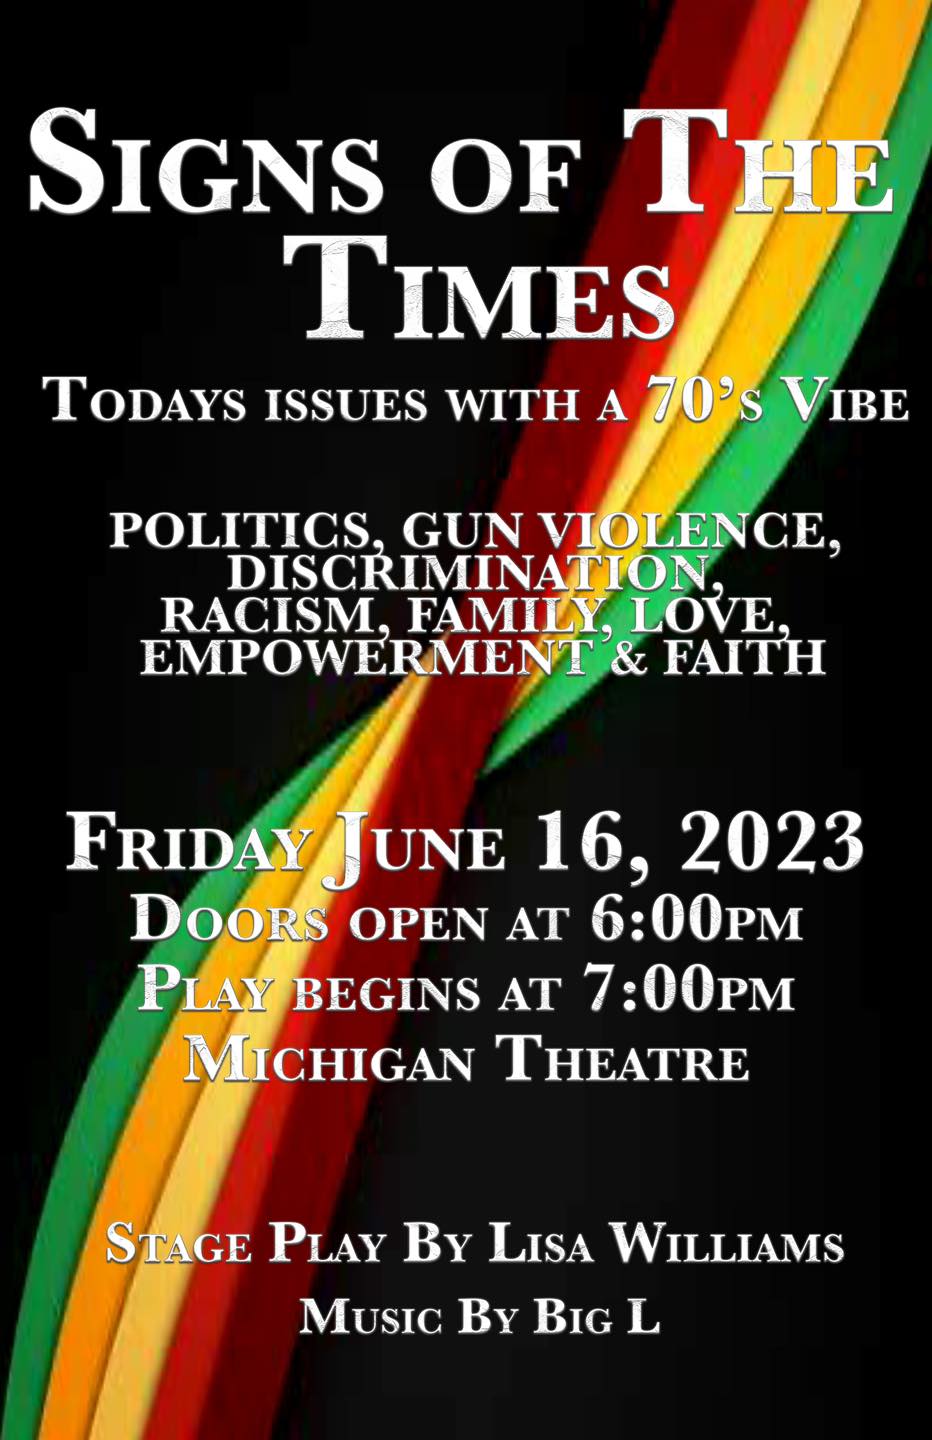 Juneteenth Community Celebration: "Sign of the Times" Directed by Lisa Williams